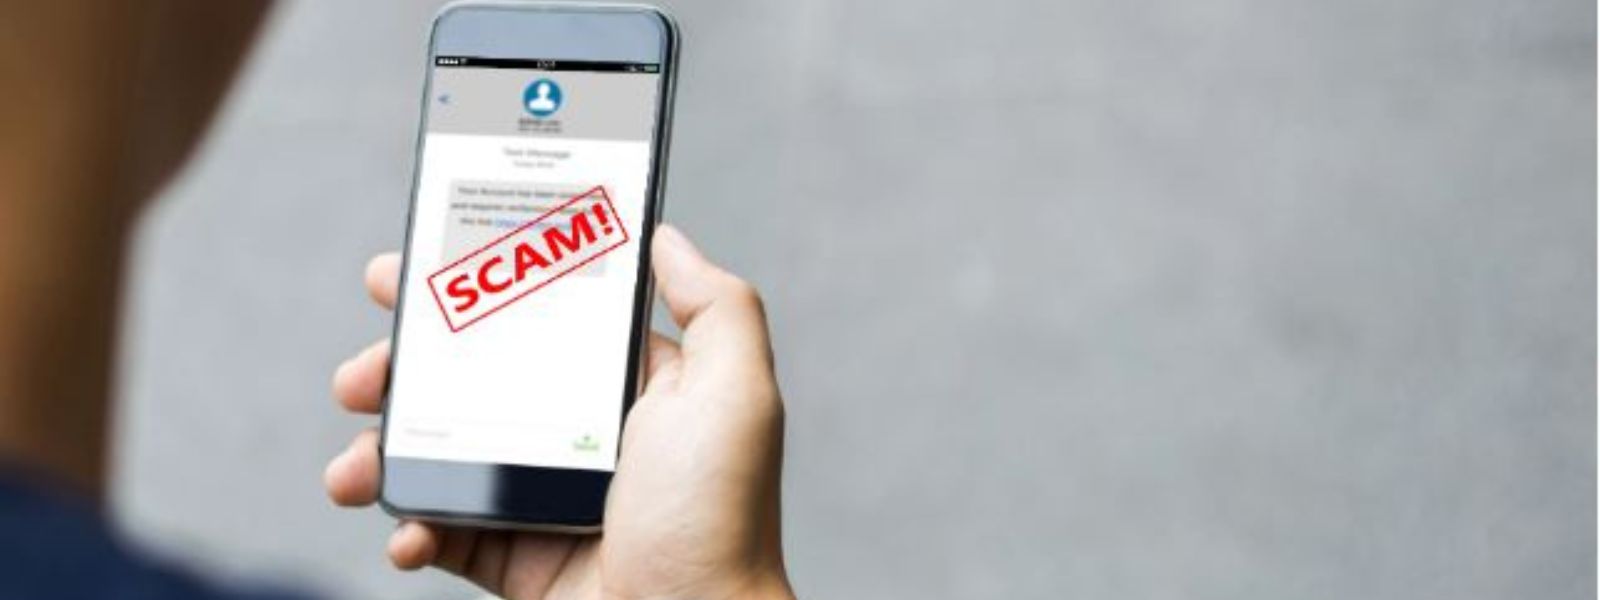 Be aware of scamming text messages - CERT